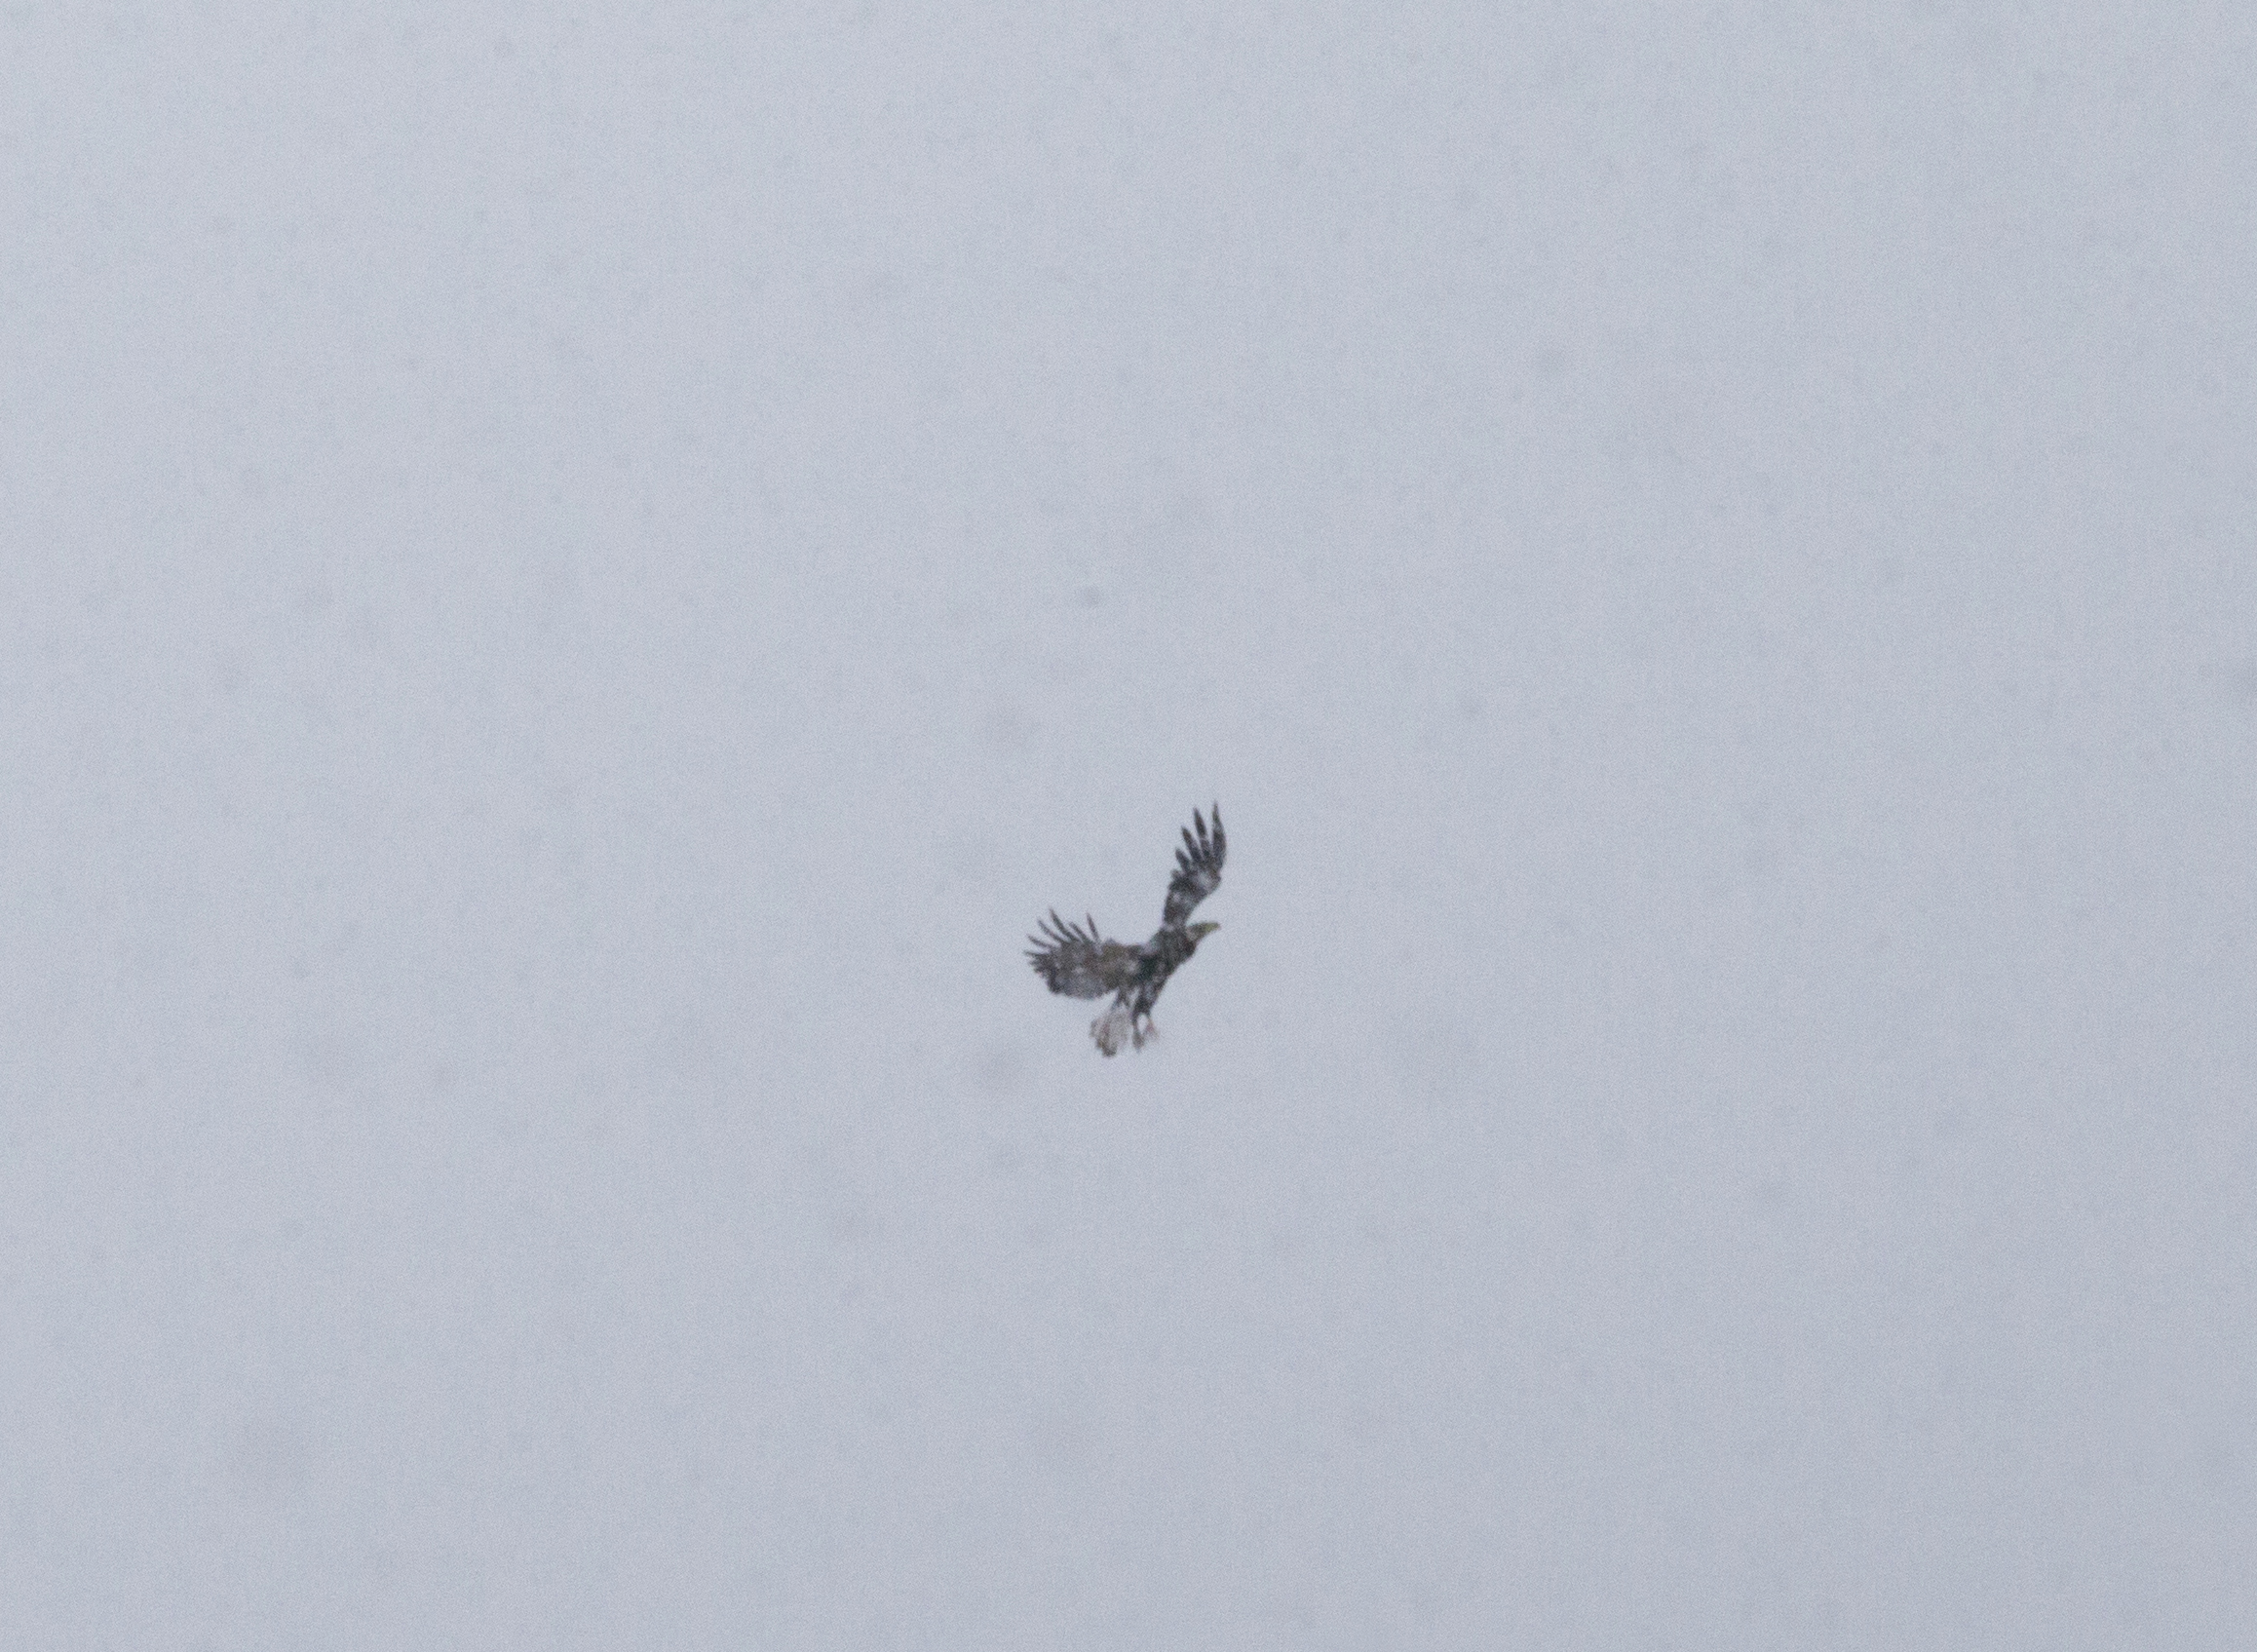 american eagle in snow storm